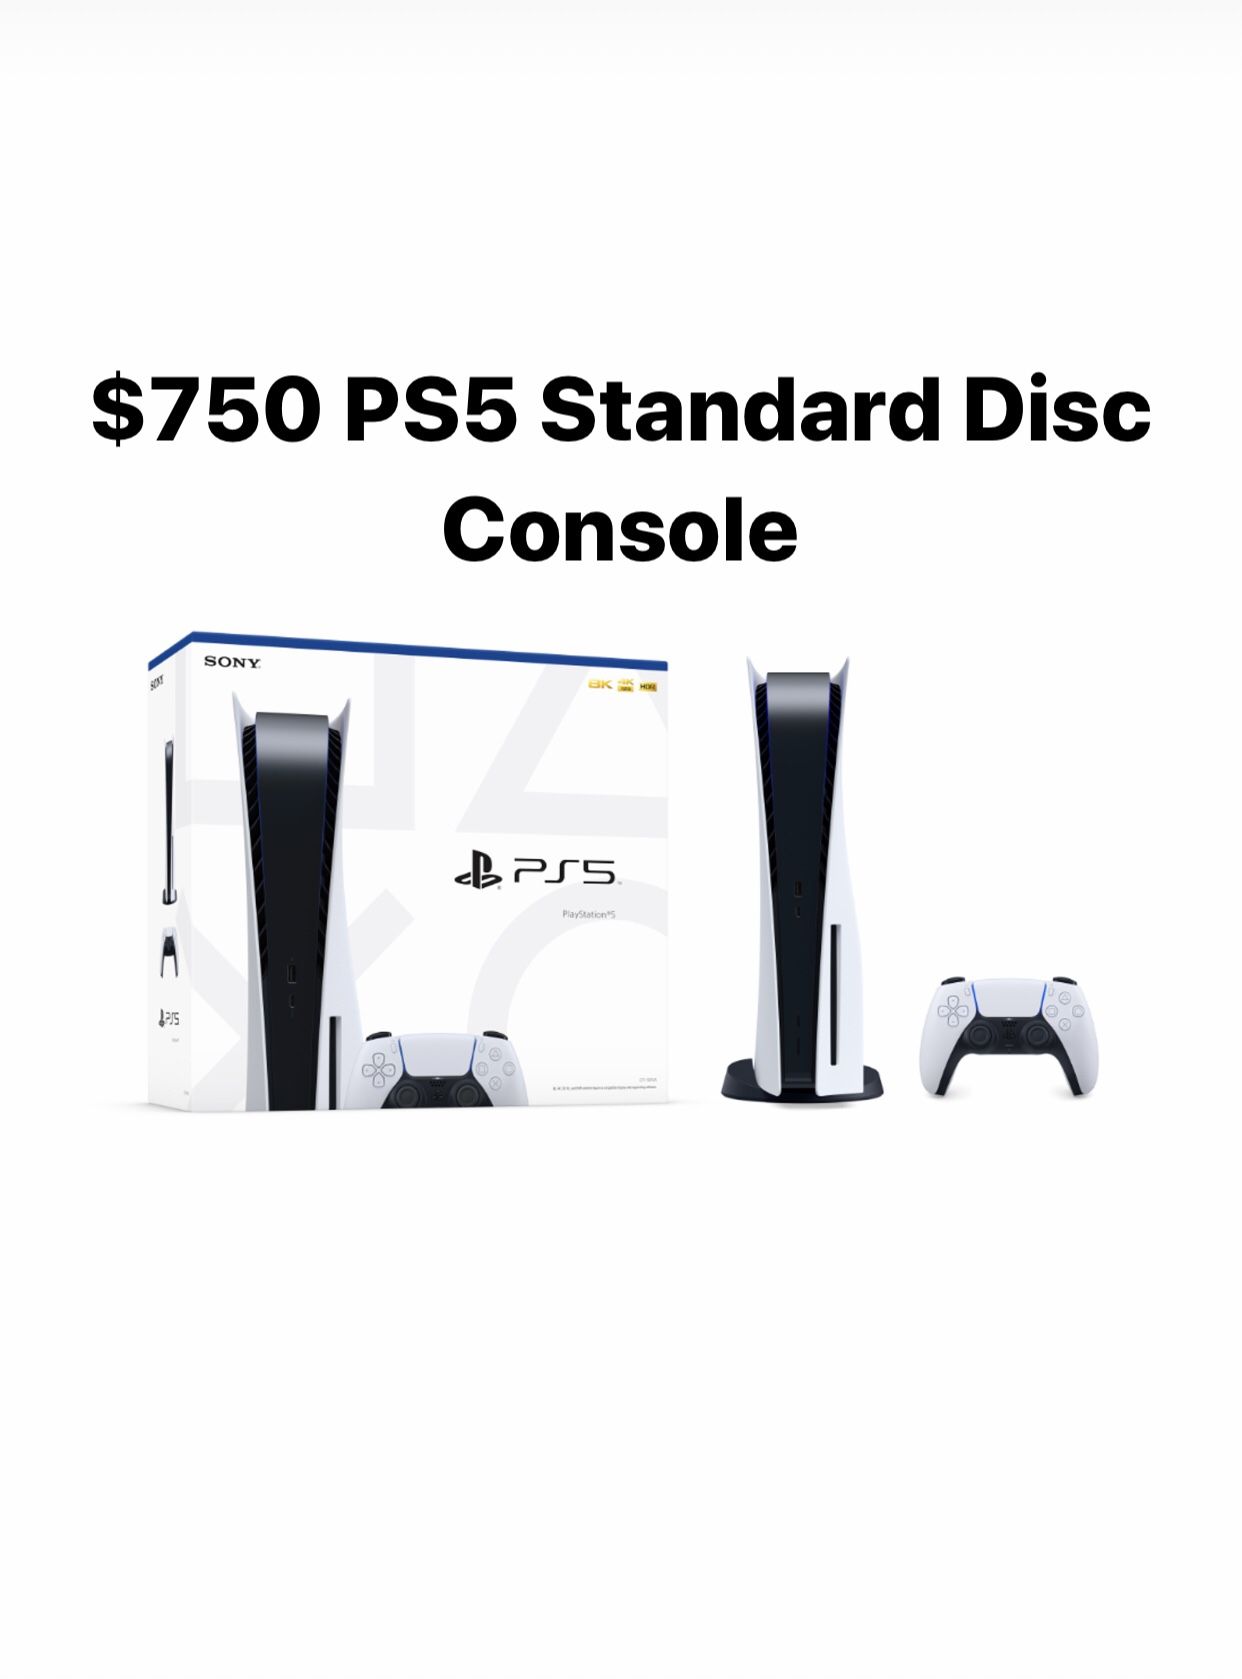 Ps5 disc standard console preorder